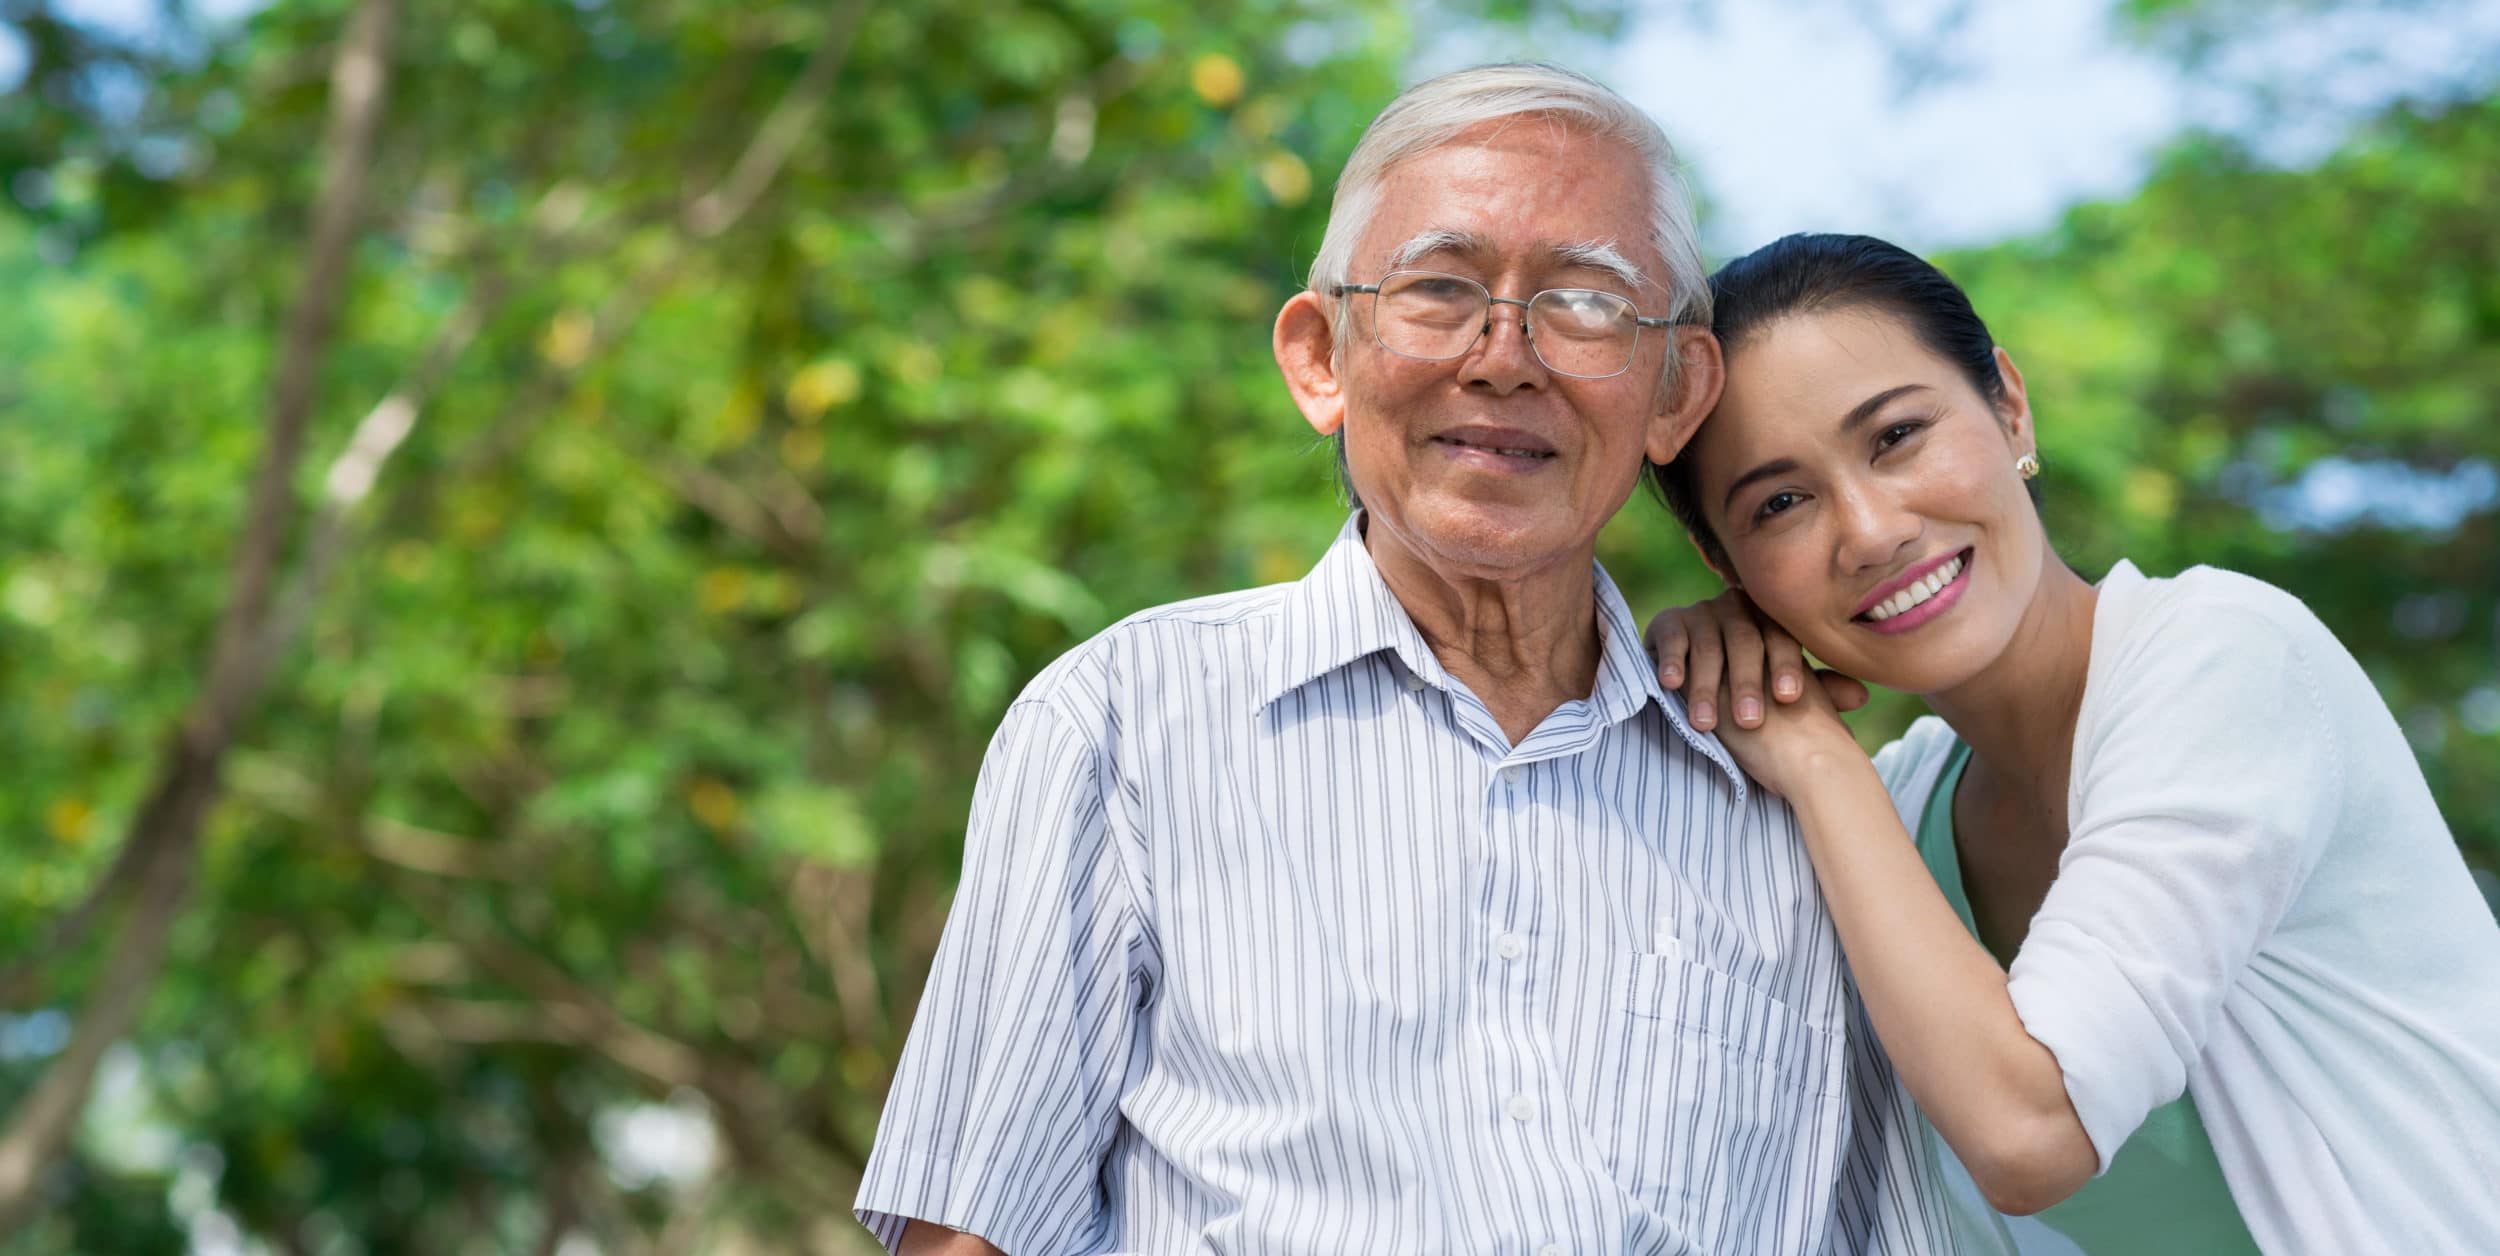 Portrait of happy senior man and his adult daughter leaning on his shoulder